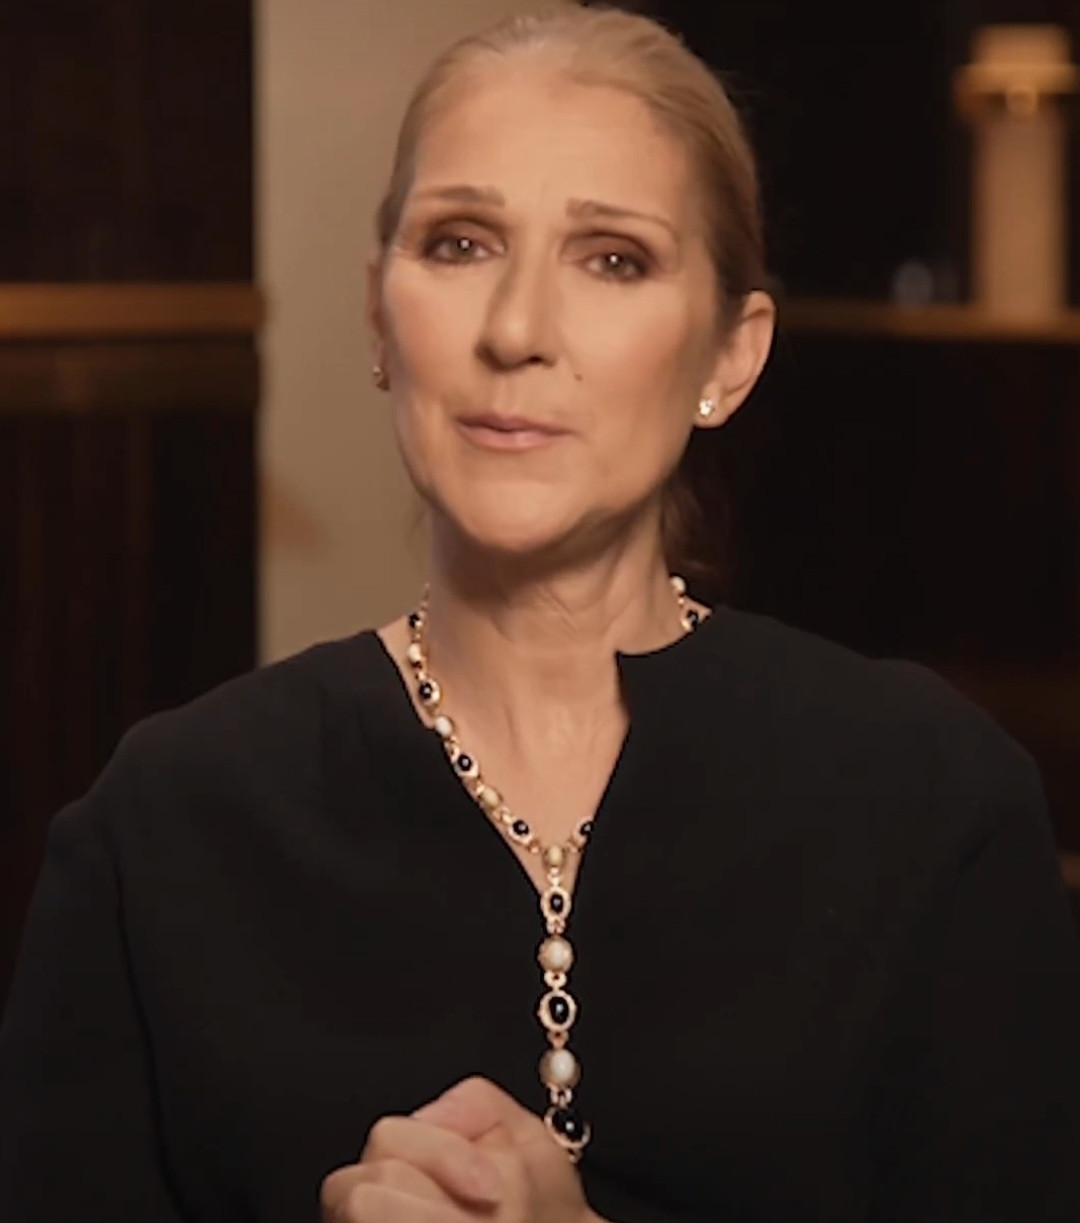 "I've been dealing with problems with my health for a long time" Tearful Celine Dion announces she's cancelling her shows due to an incurable disease (video)